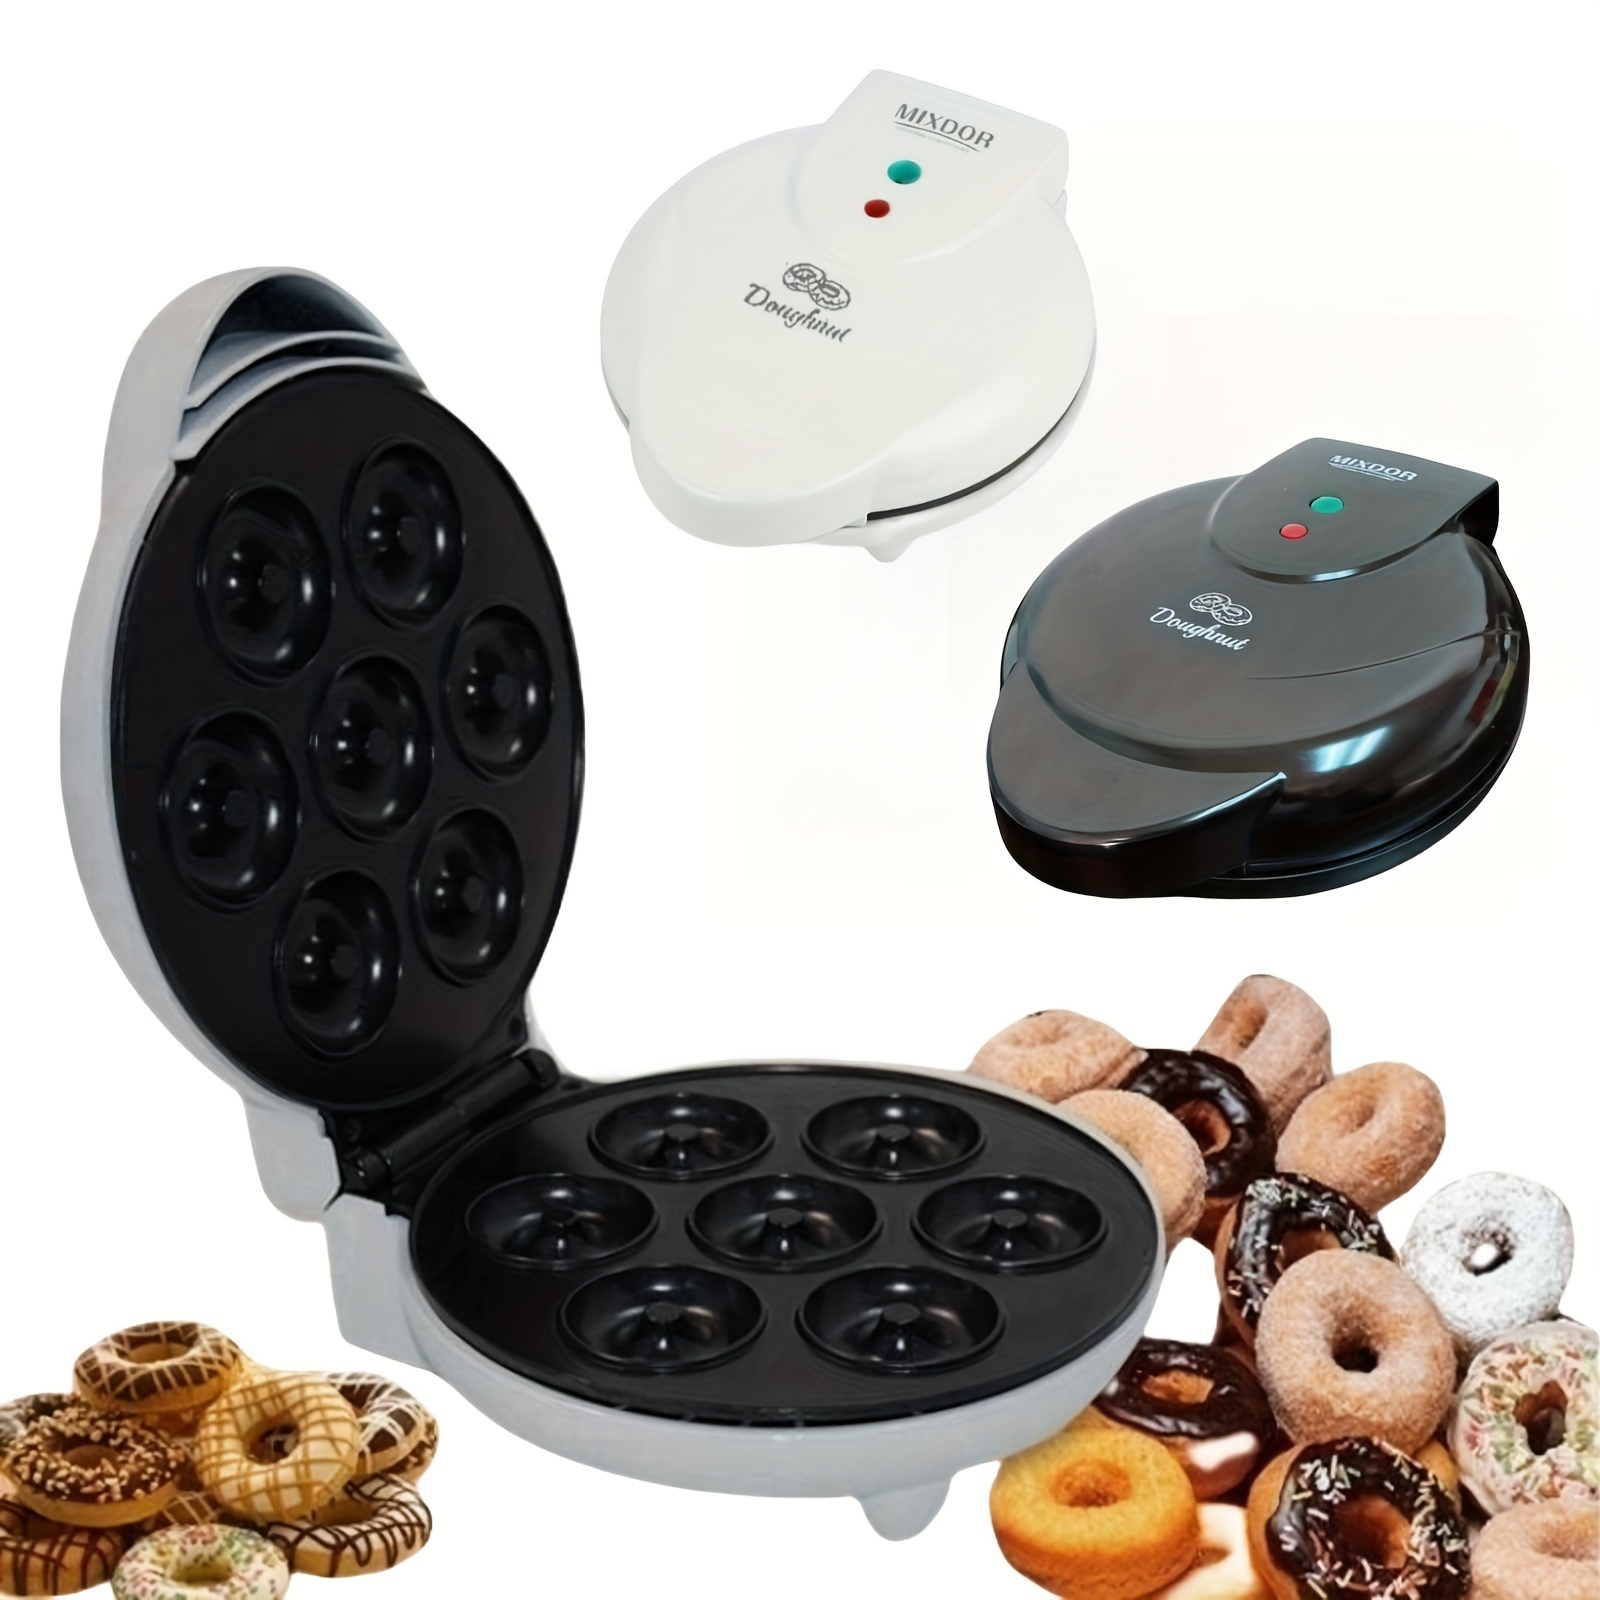  Mini Pancakes Maker, Mini Donut Maker Machine for Breakfast,  Snacks, Desserts & More With Non-stick Surface, Cake Machine, Double-Sided  Heating Makes 16 Doughnuts (black New): Home & Kitchen